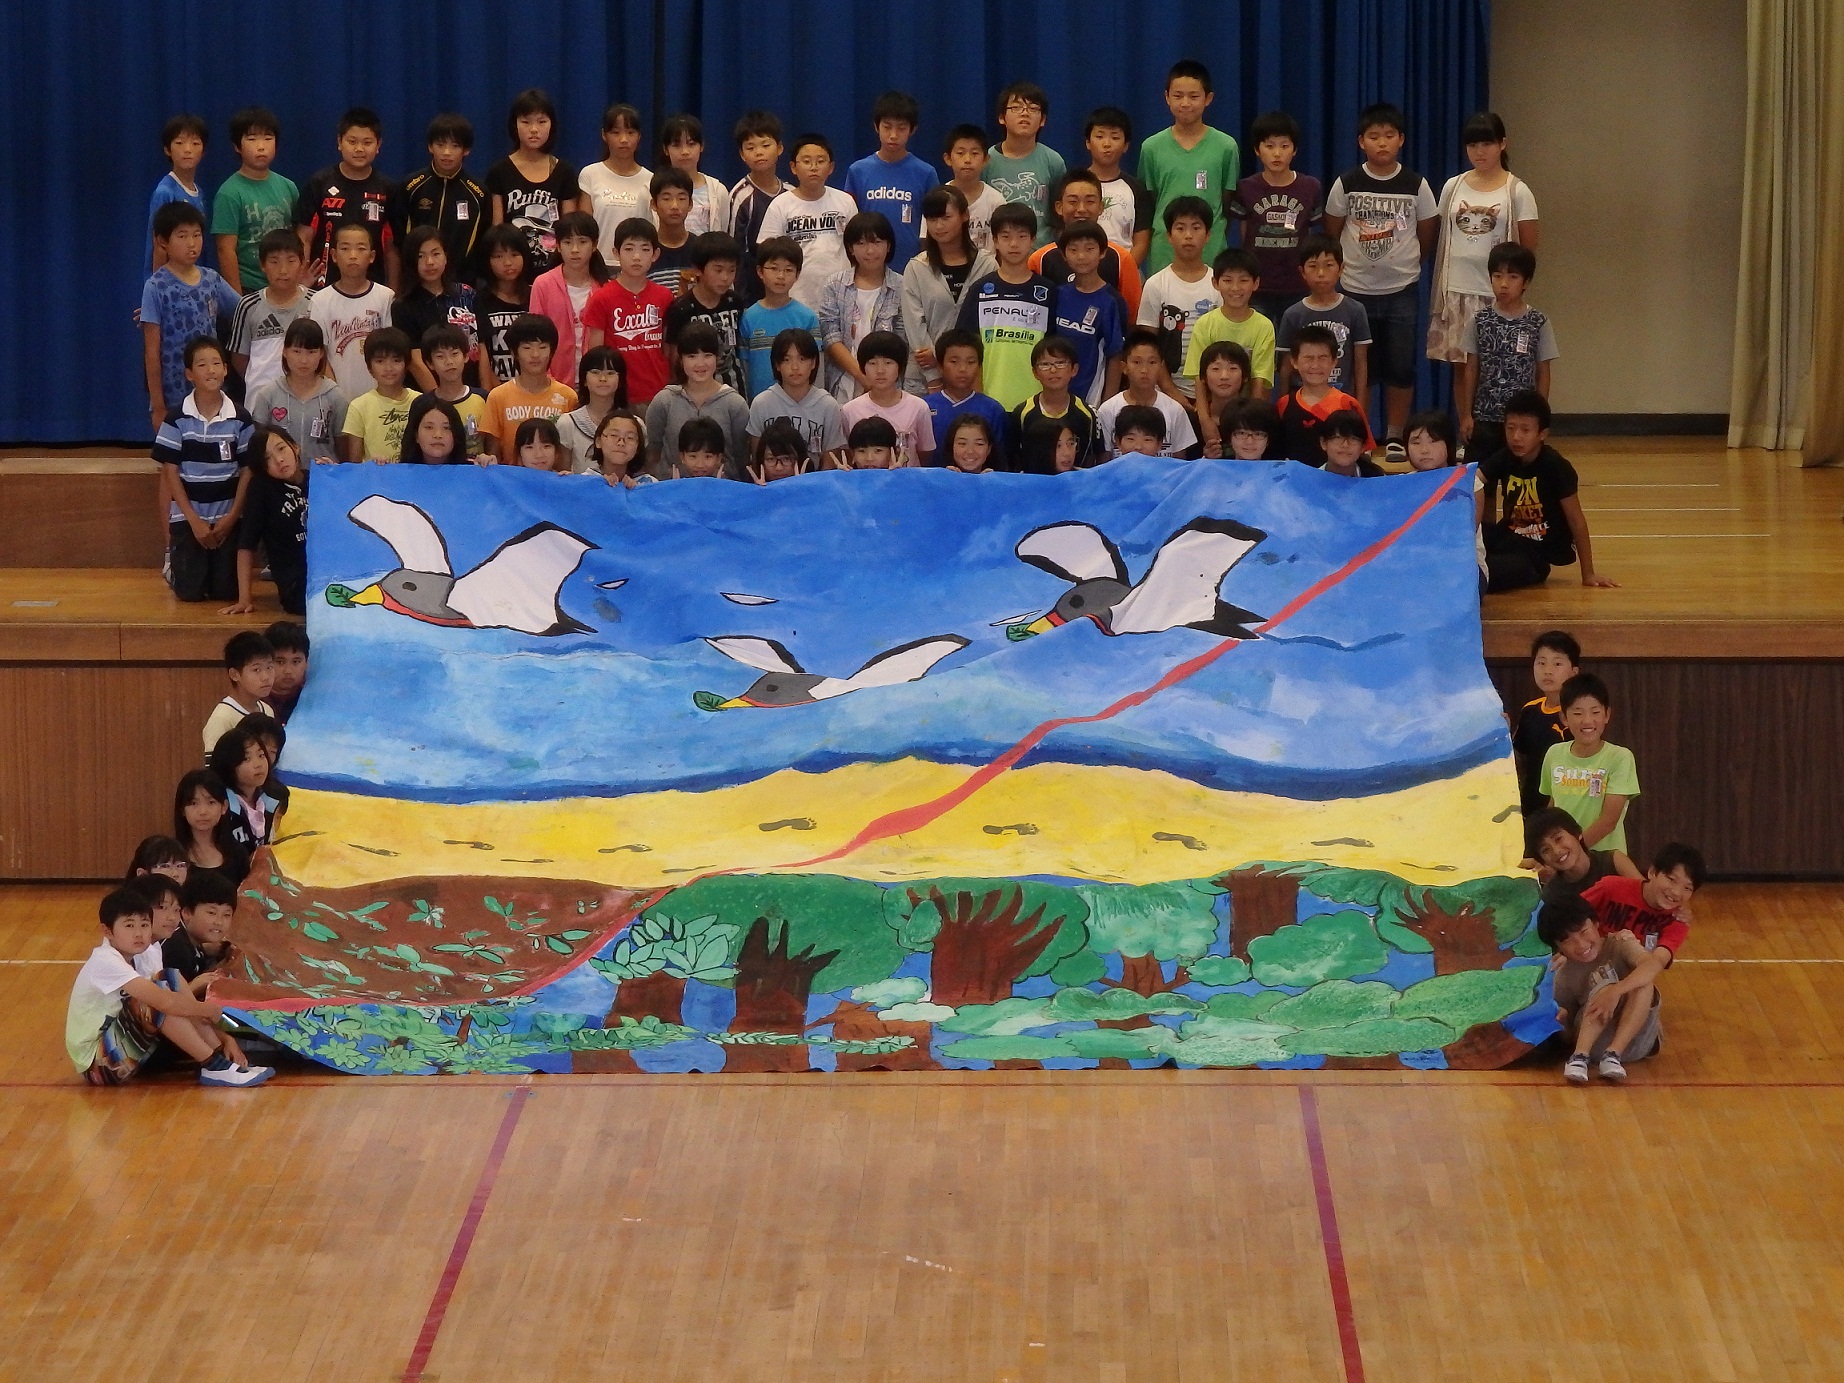 The Biggest Painting in the World 2020 Shichigahama Town was completed